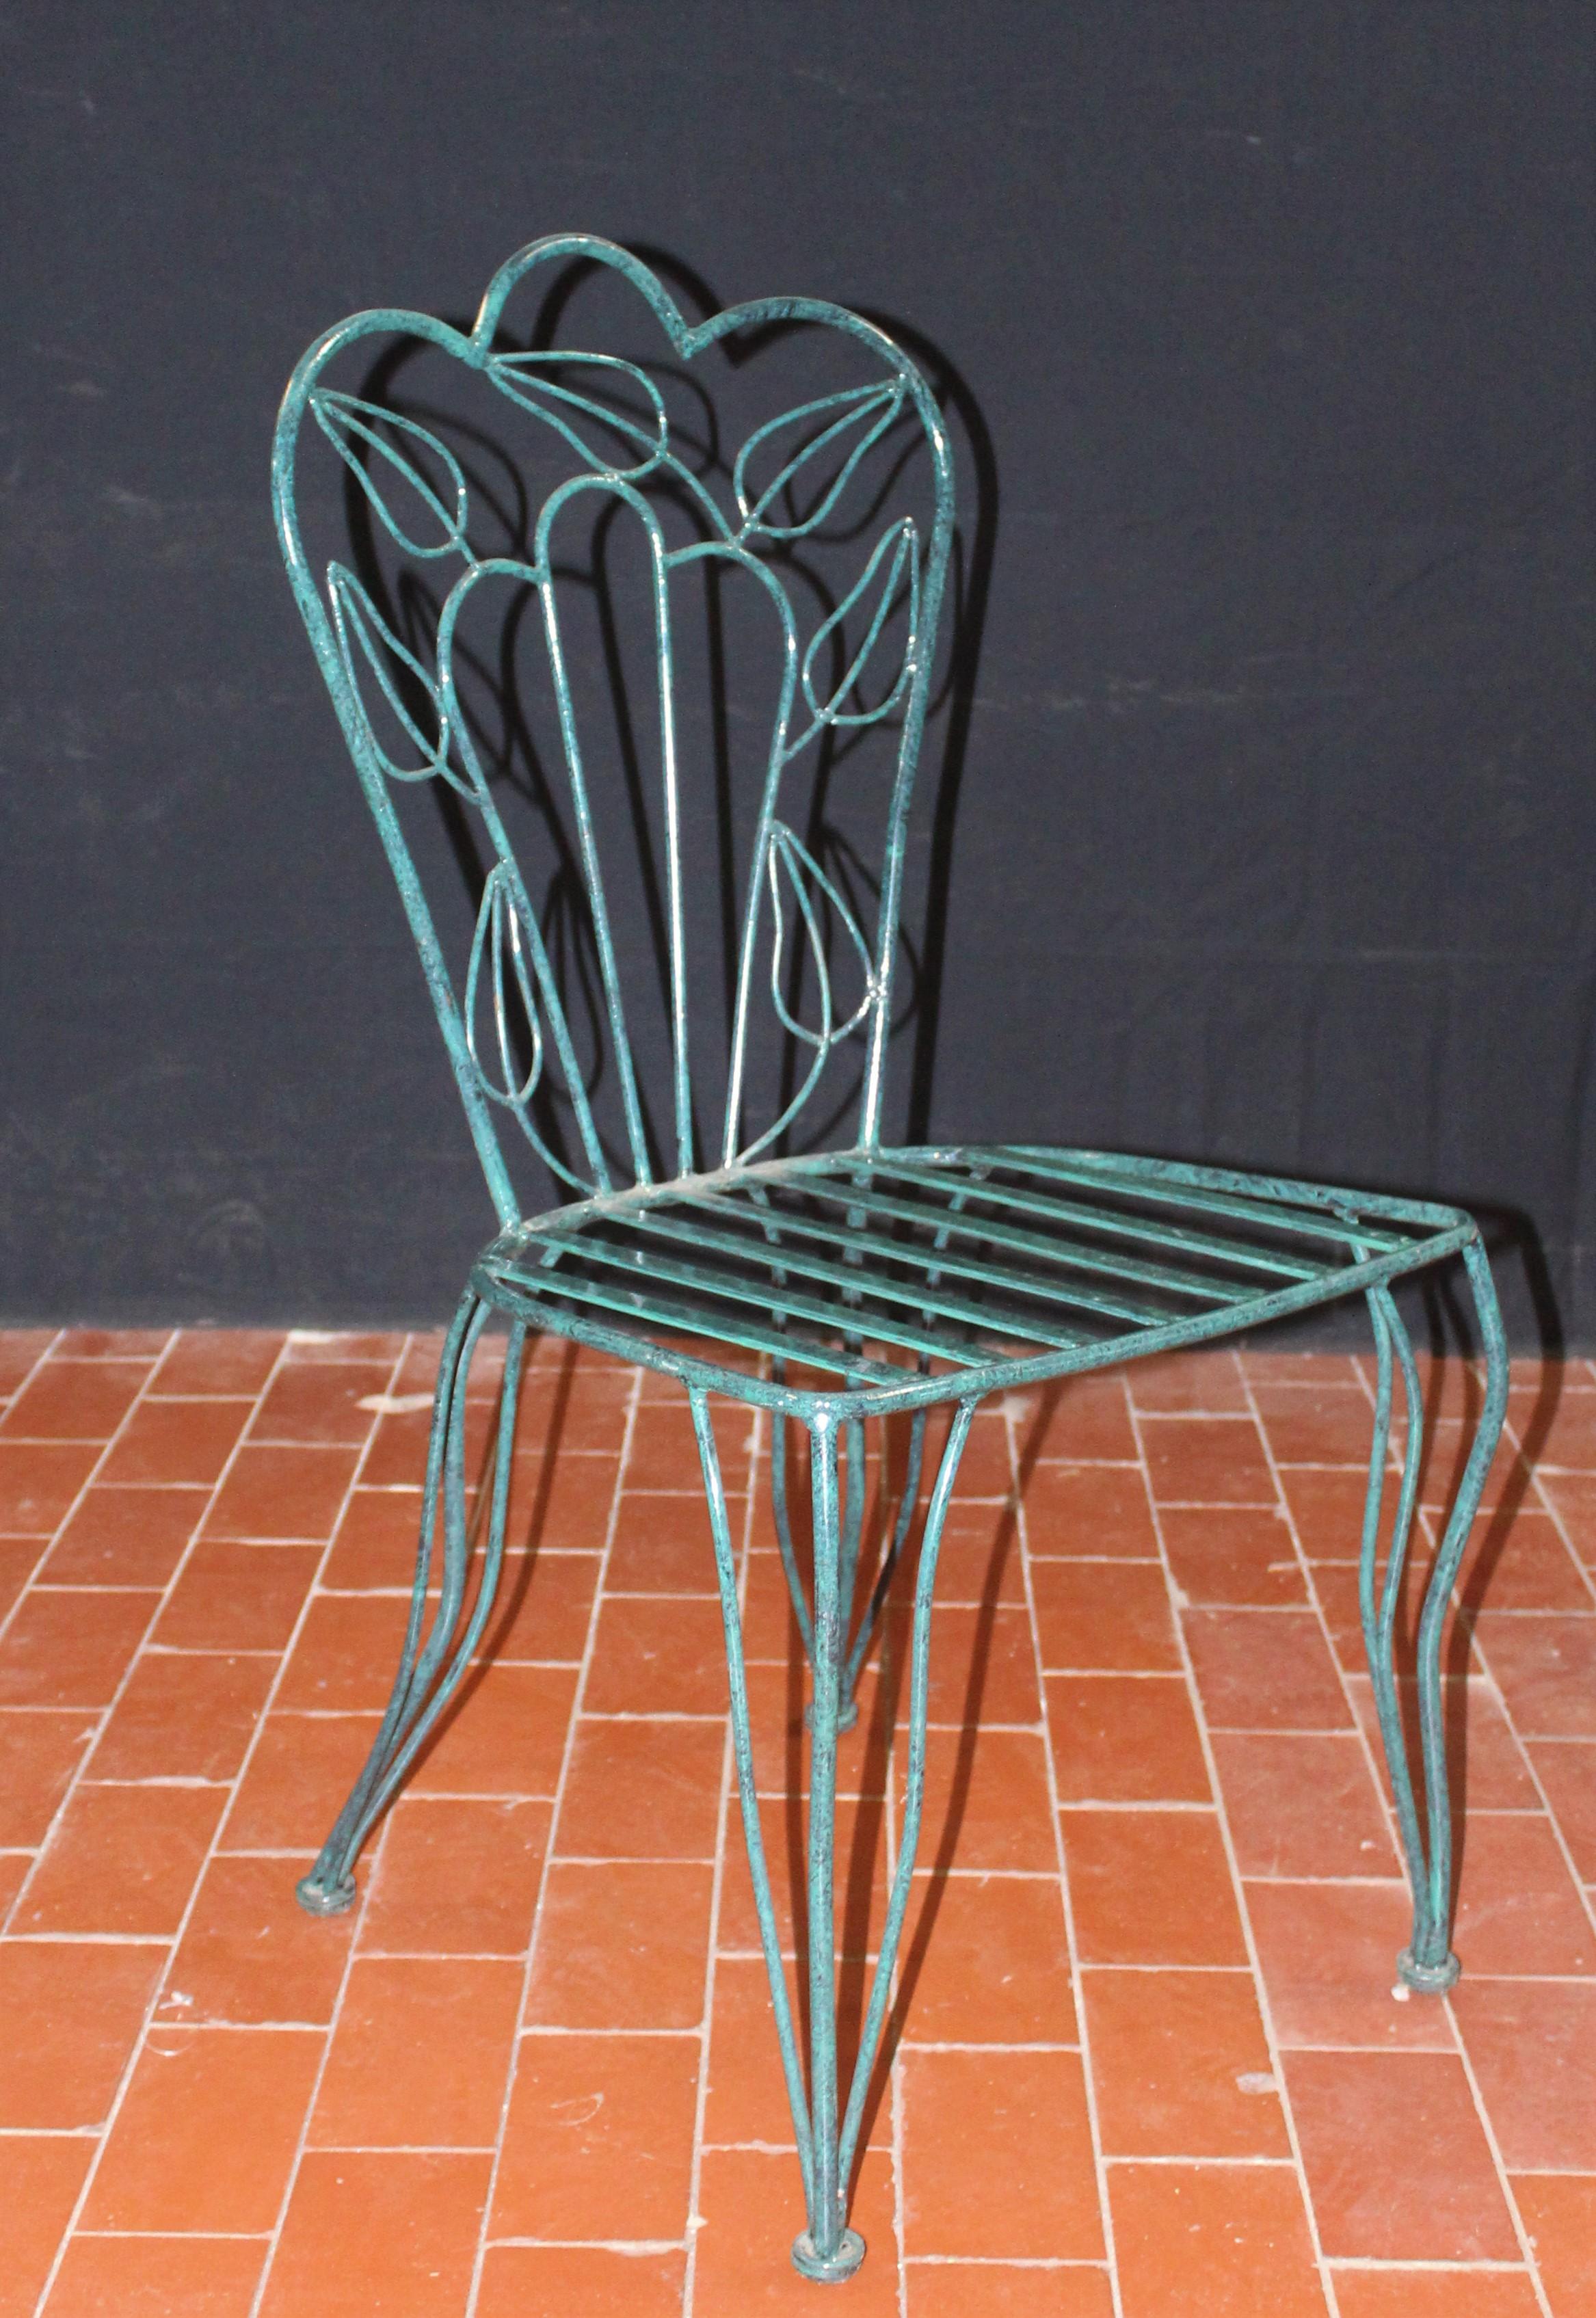 Unique pair of very stylish mottled green powder coated patio chairs.